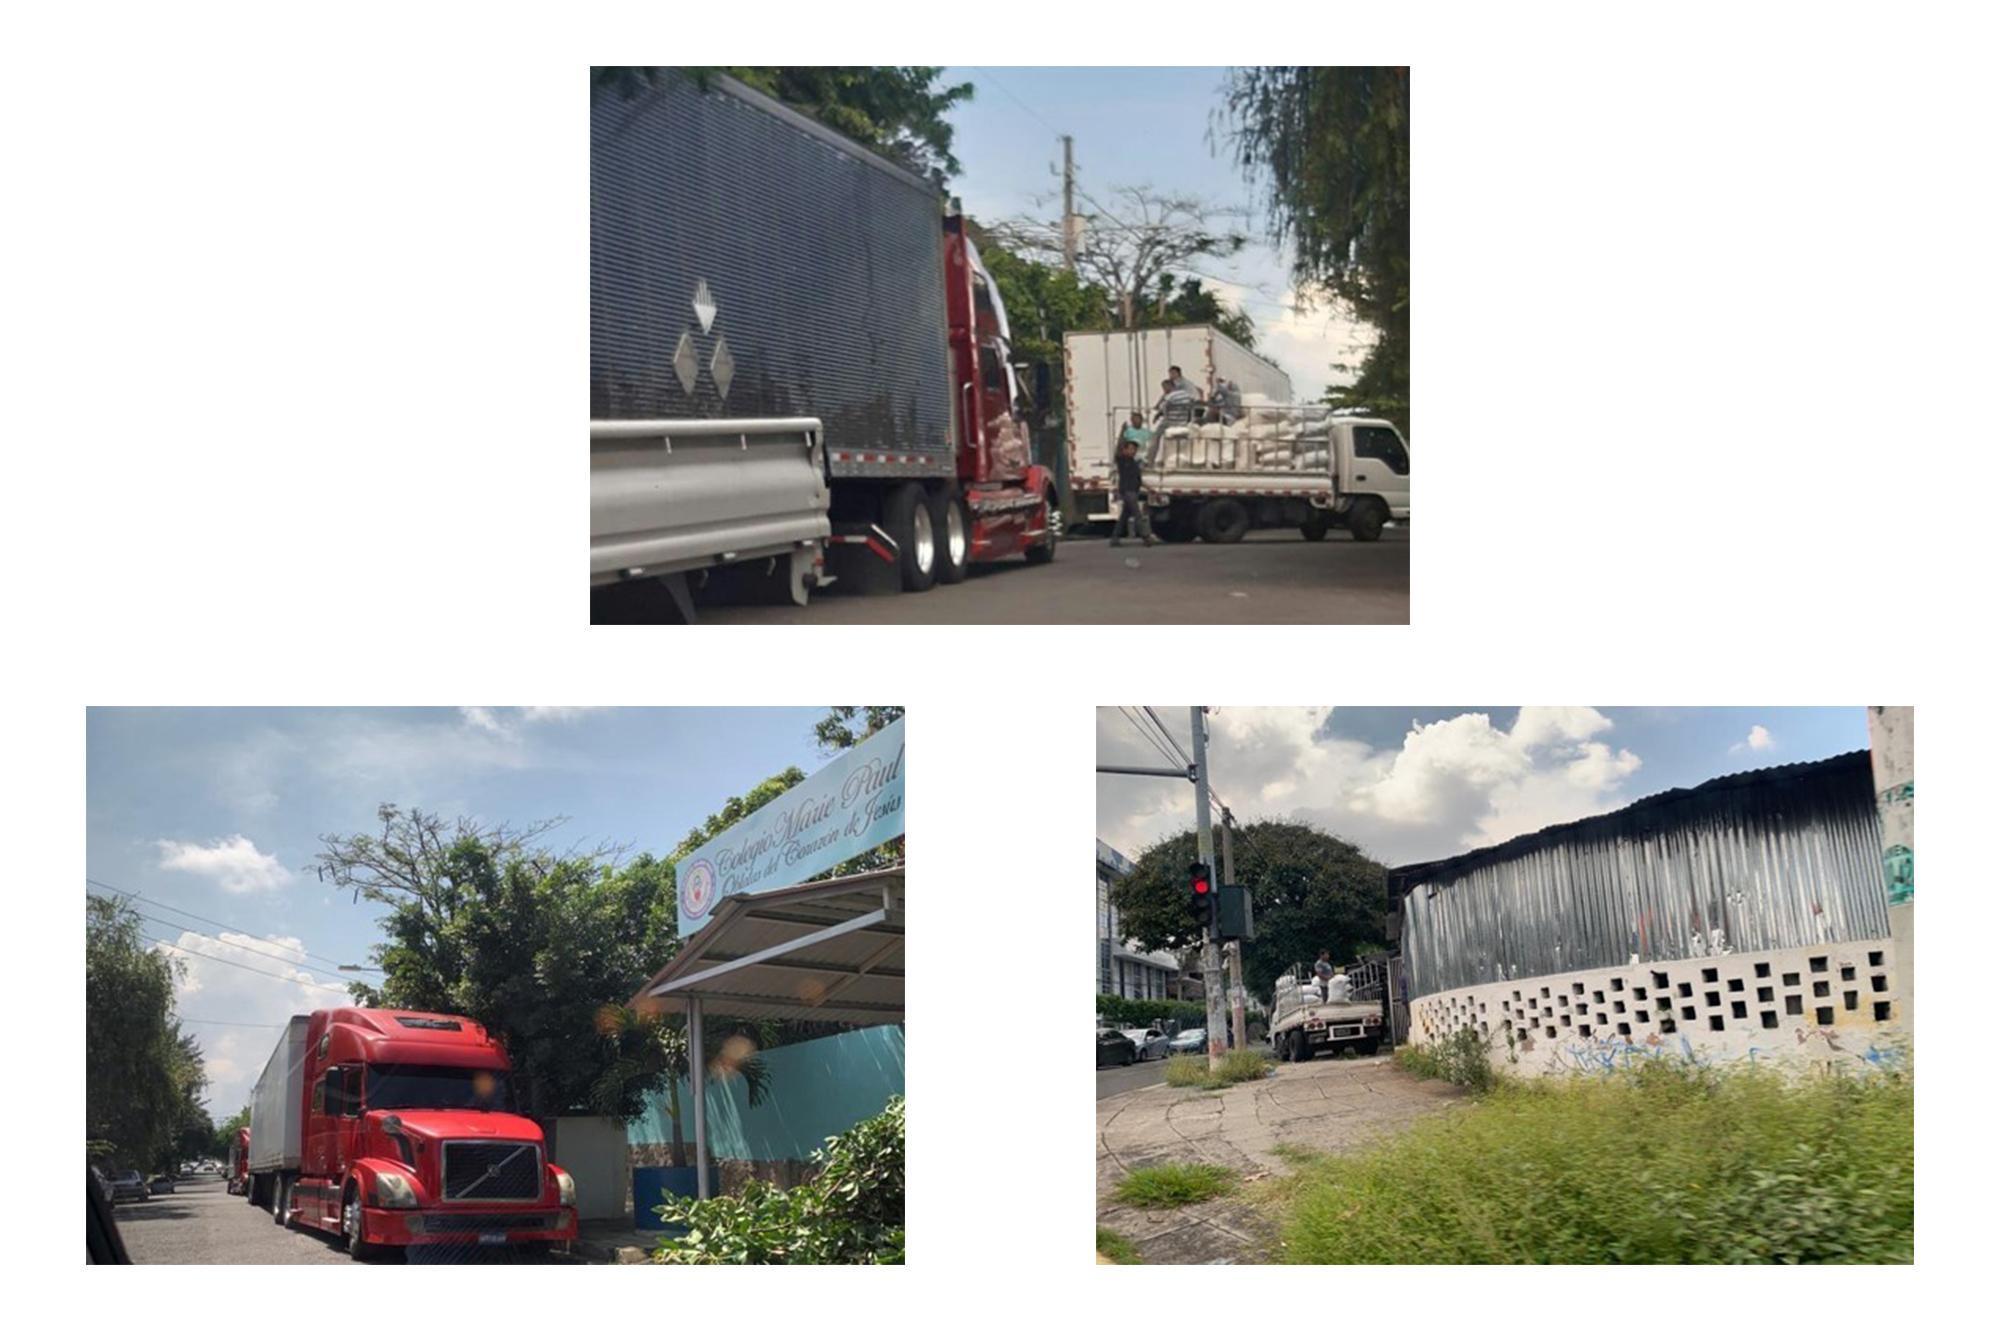 Top and bottom-right: Sacks of food as they leave Mariona Prison and their arrival at the Martínez Arévalo family warehouse. Bottom-left: Another private truck used to transport the emergency food supplies. Photos from Operationl Cathedral case file.